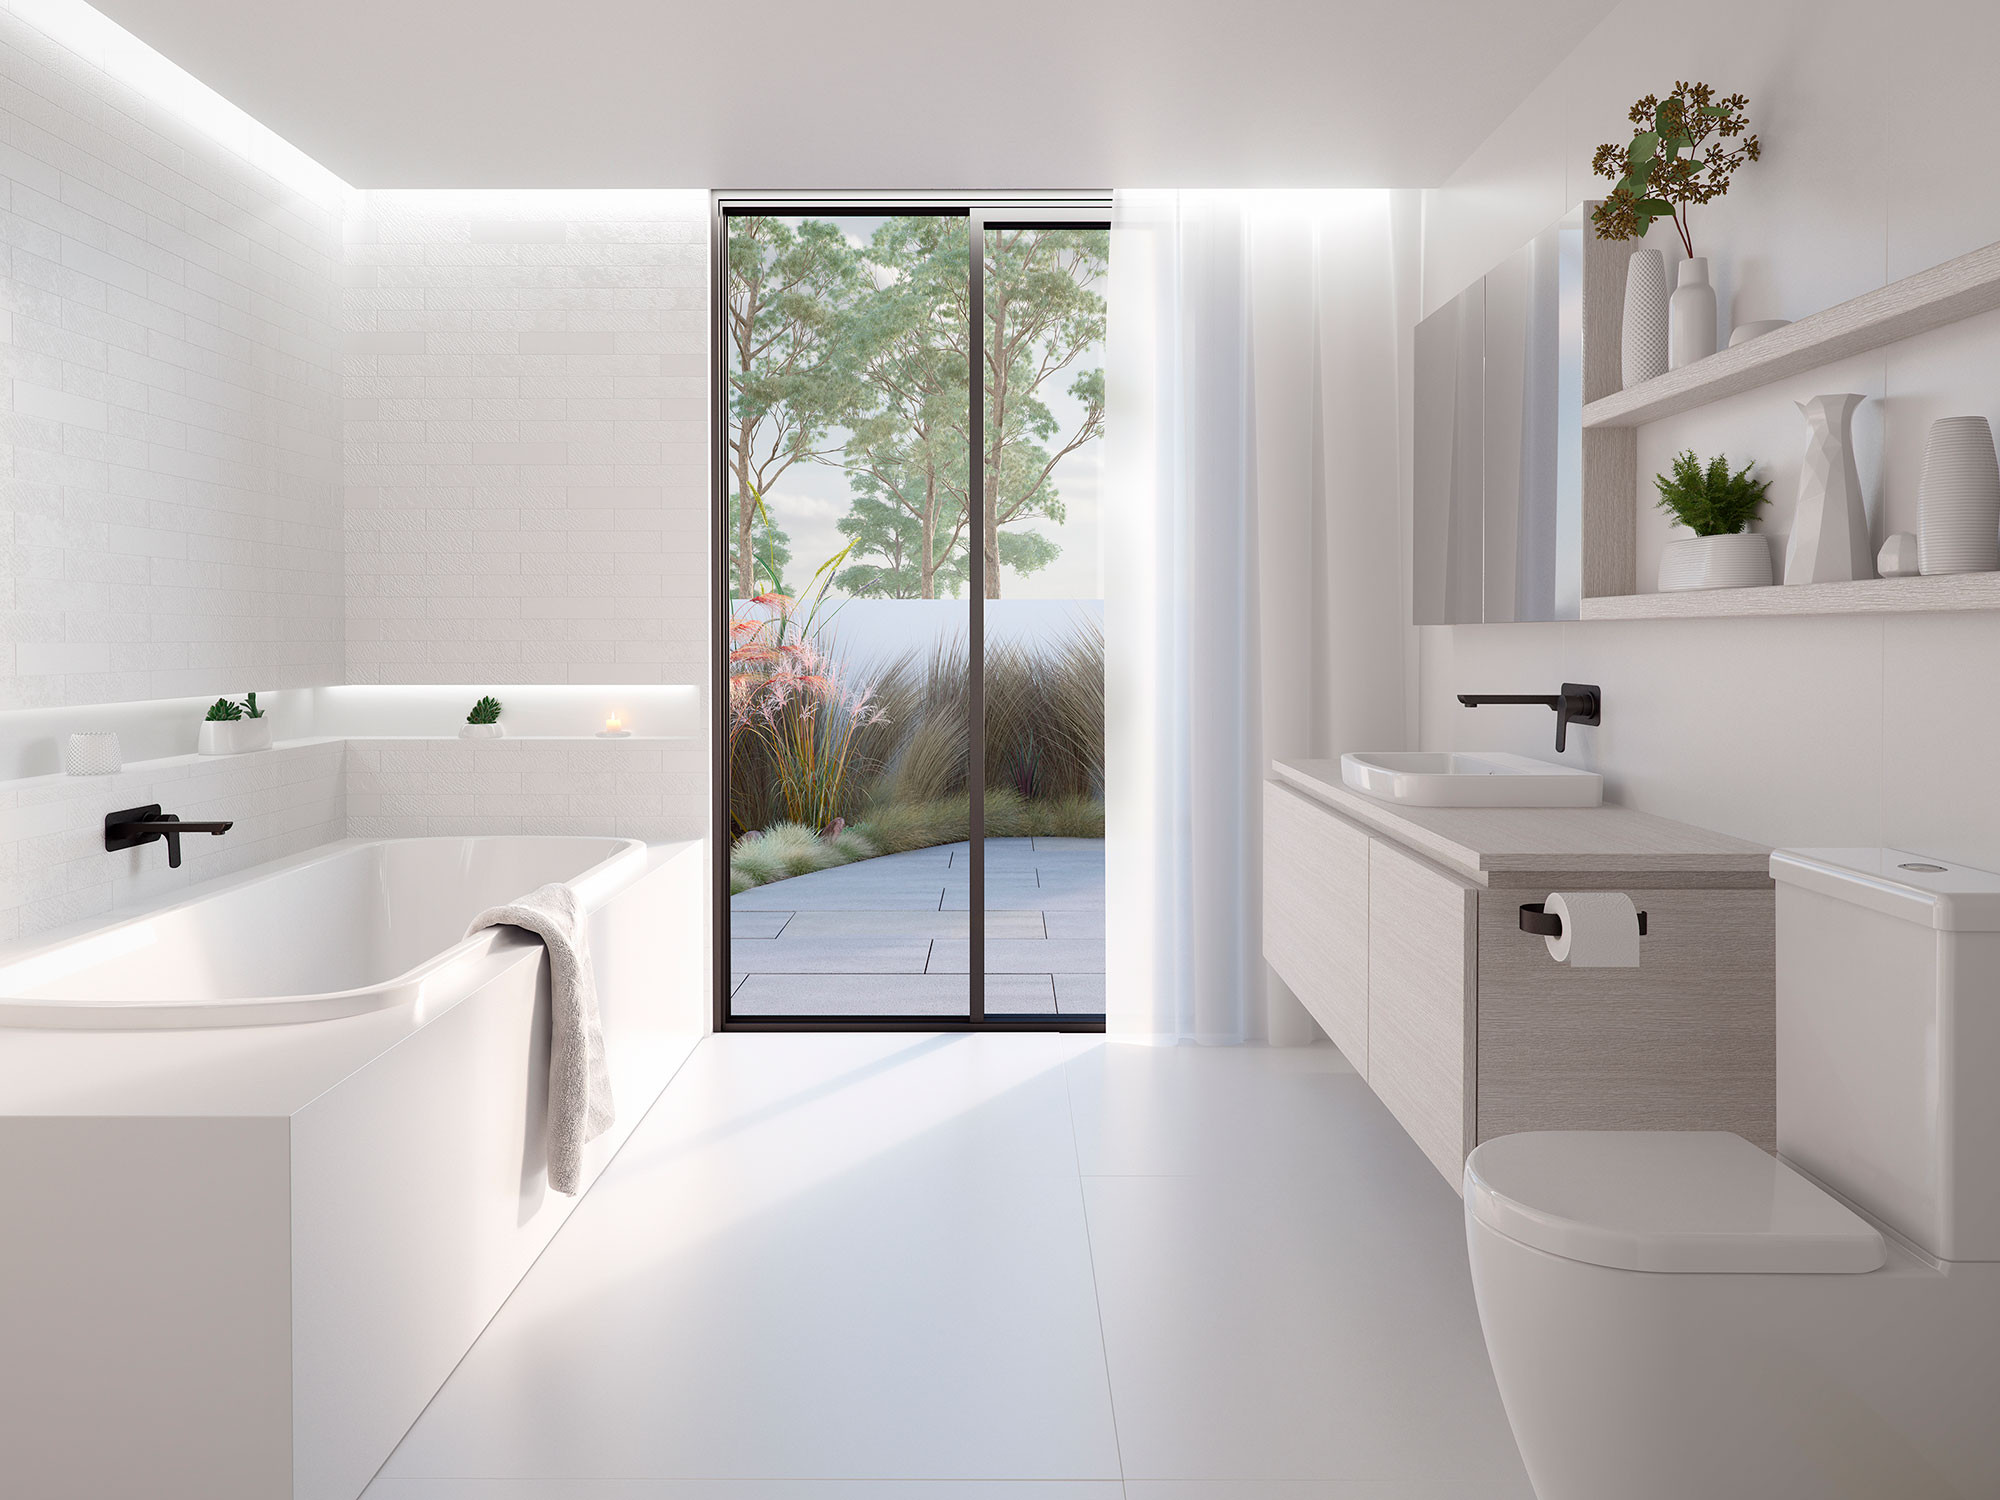 Design My Bathroom
 2019 Review The Latest & Greatest in Bathroom Design